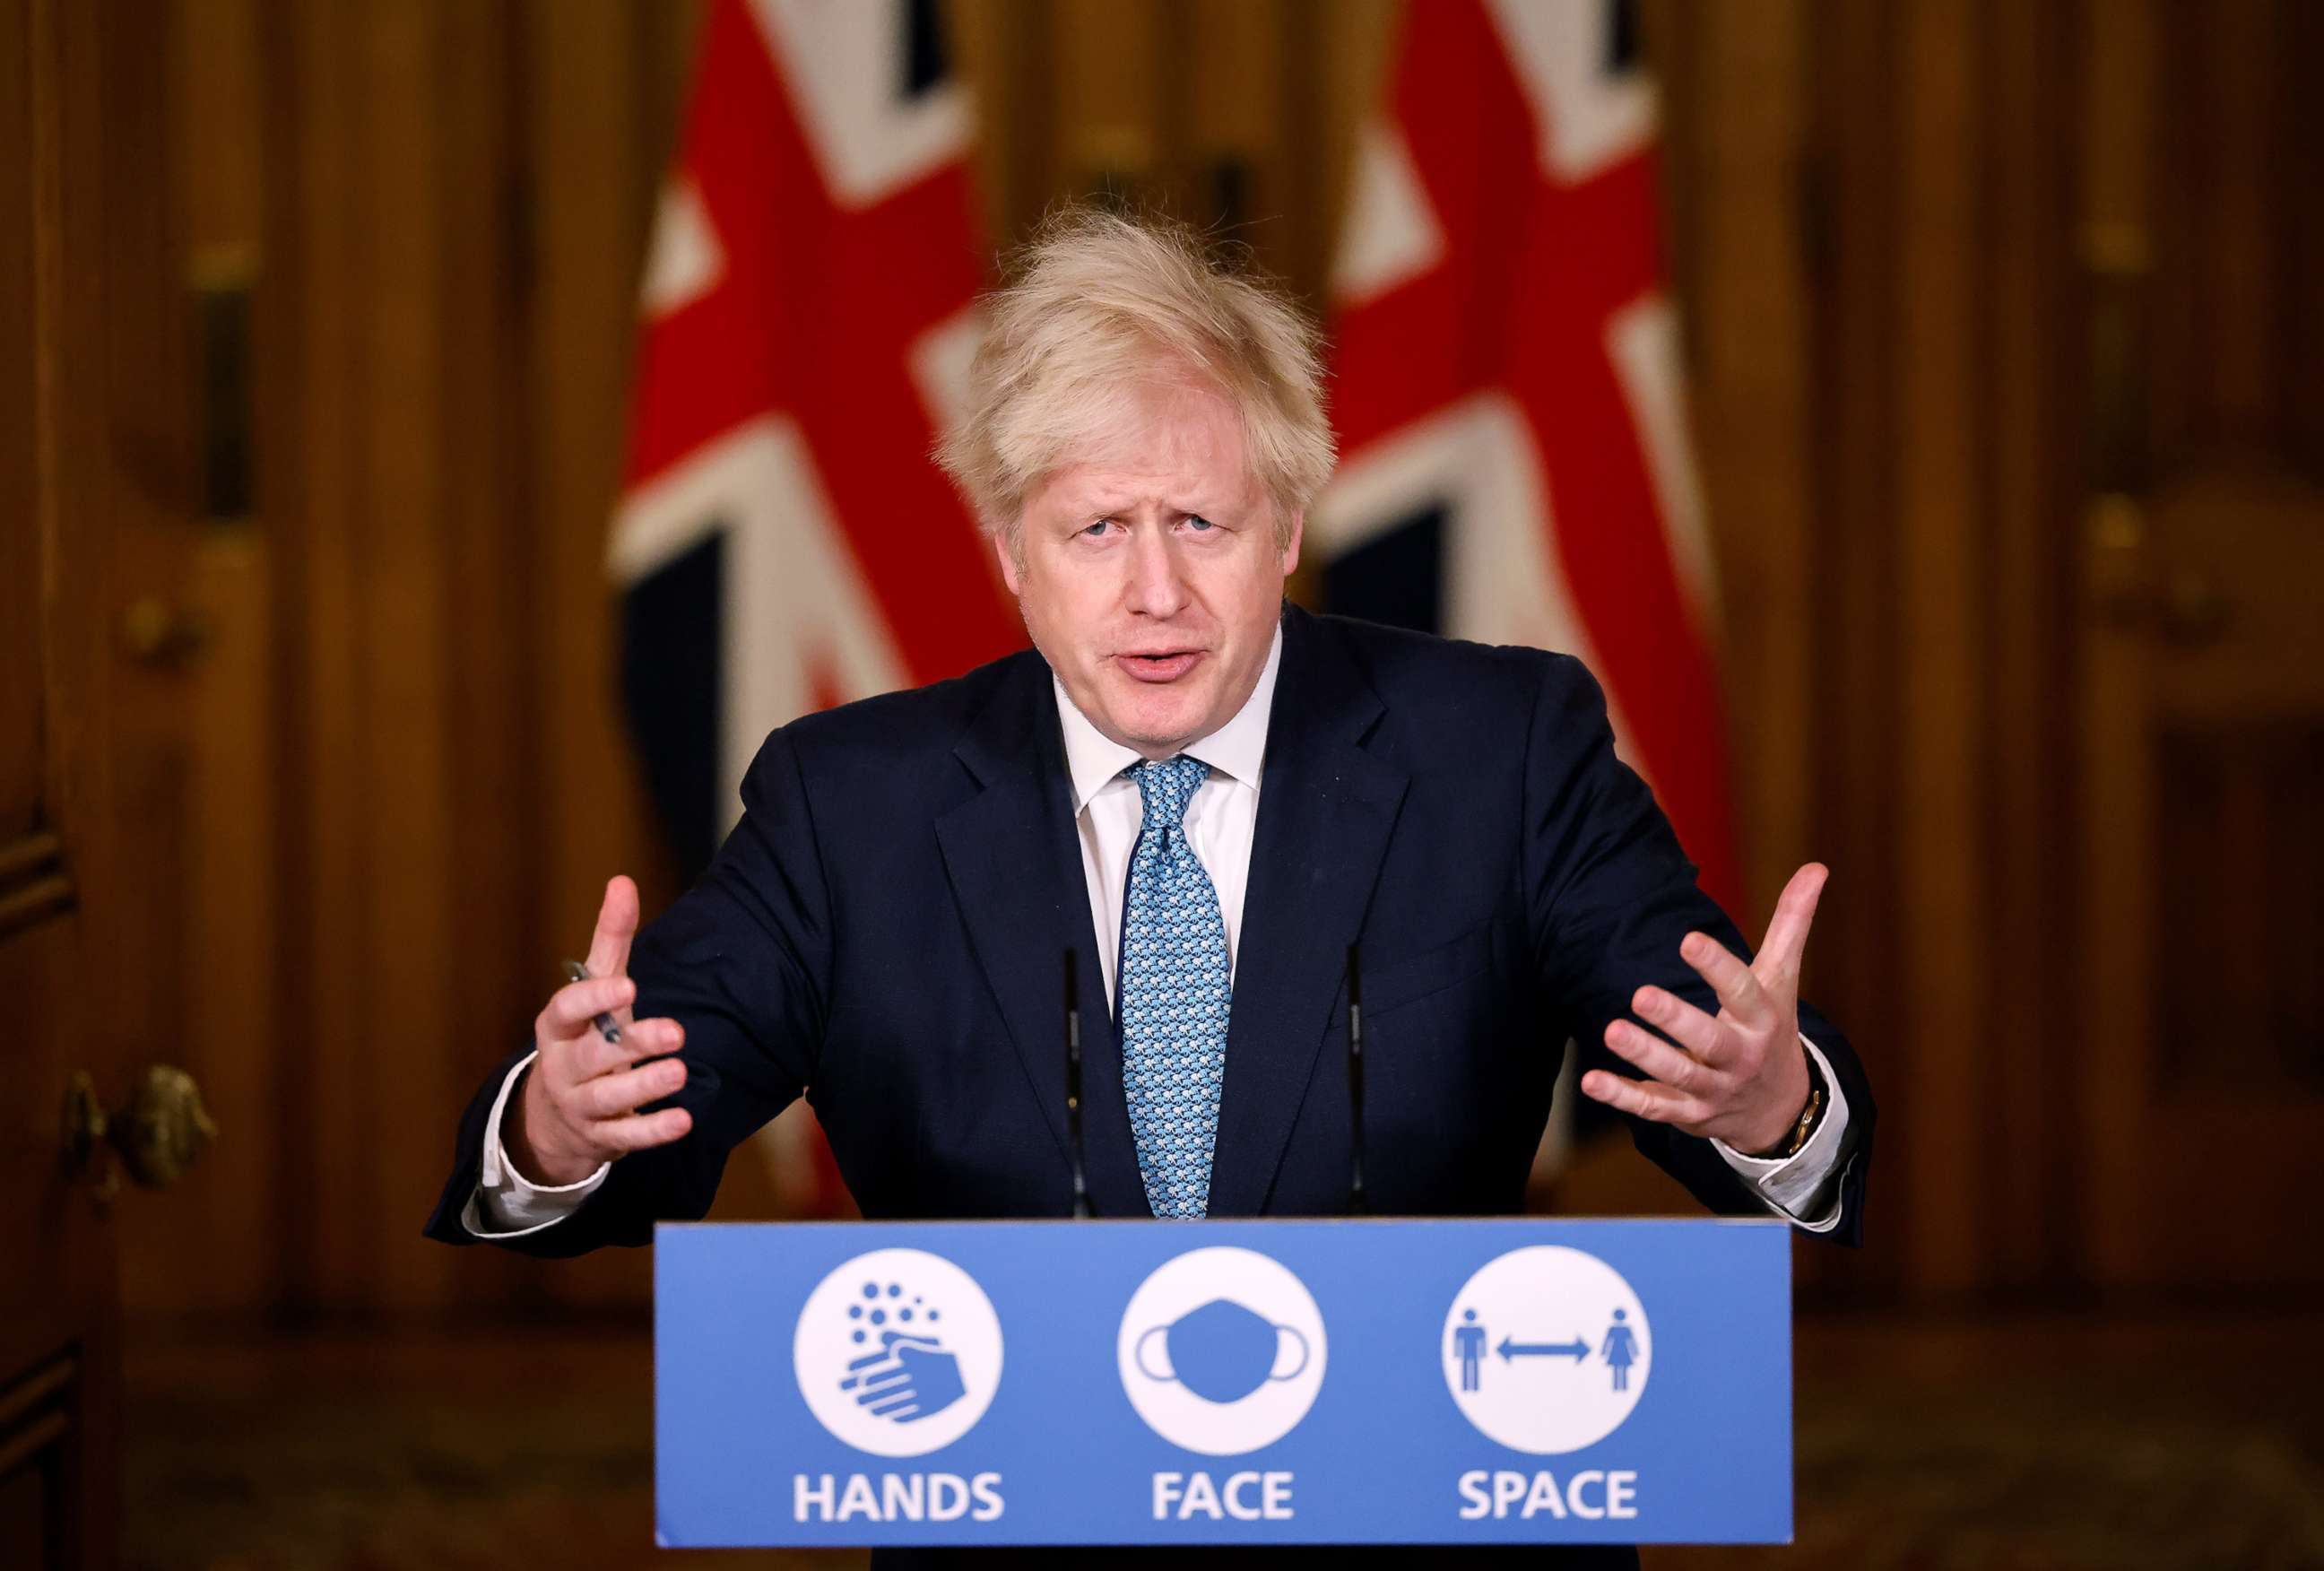 PHOTO: Britain's Prime Minister, Boris Johnson speaks during a virtual press conference after a string of countries banned travelers due to the rapid spread of a new, more-infectious coronavirus strain, Dec. 21, 2020, in London.